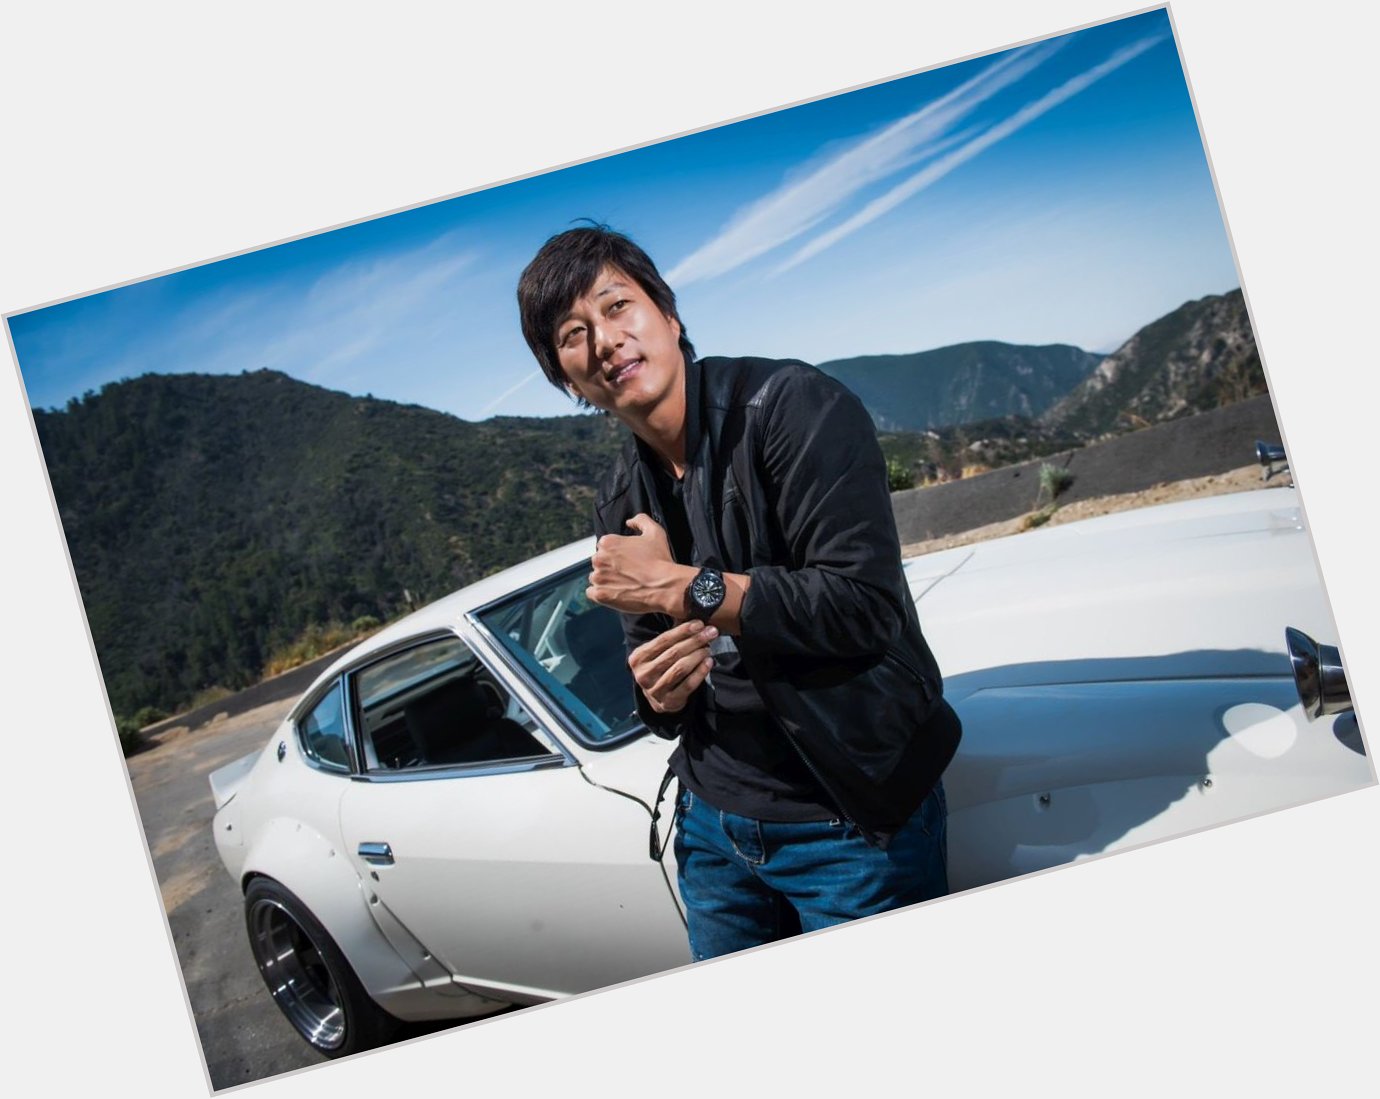 Happy Birthday to Sung Kang   About:  